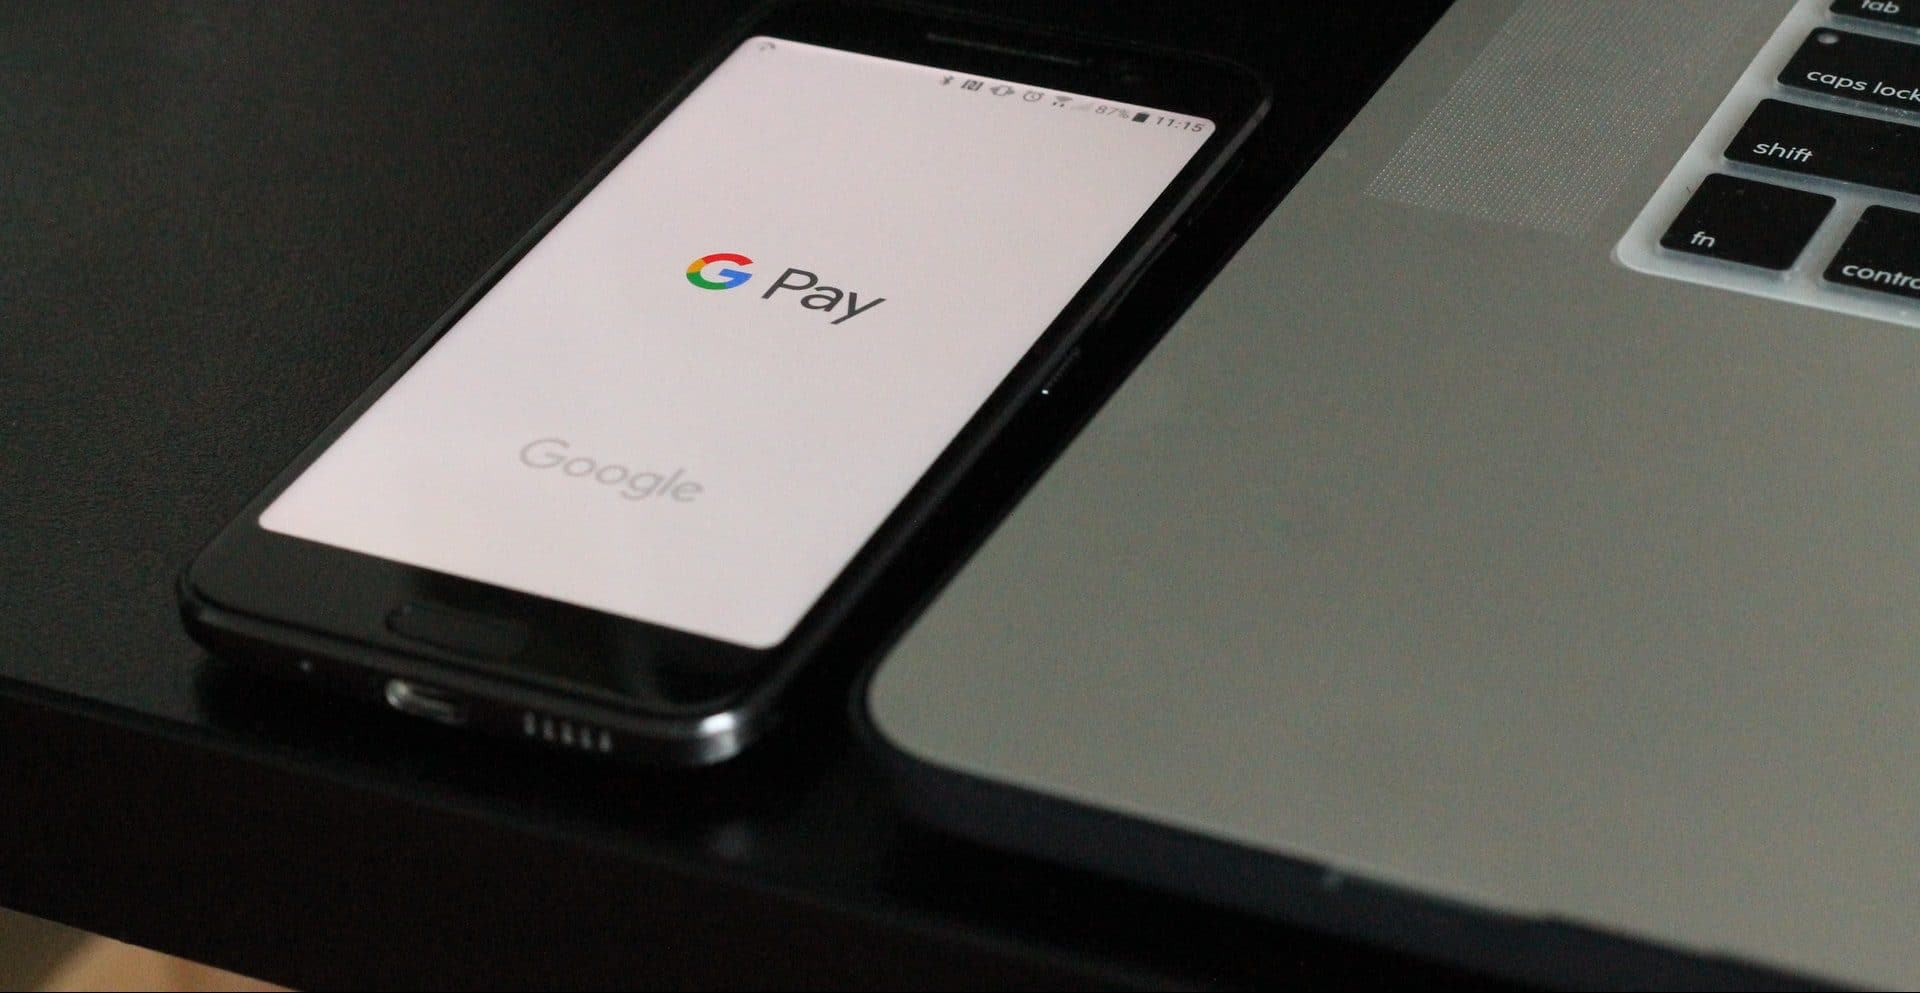 Google pay is under investigation in India.